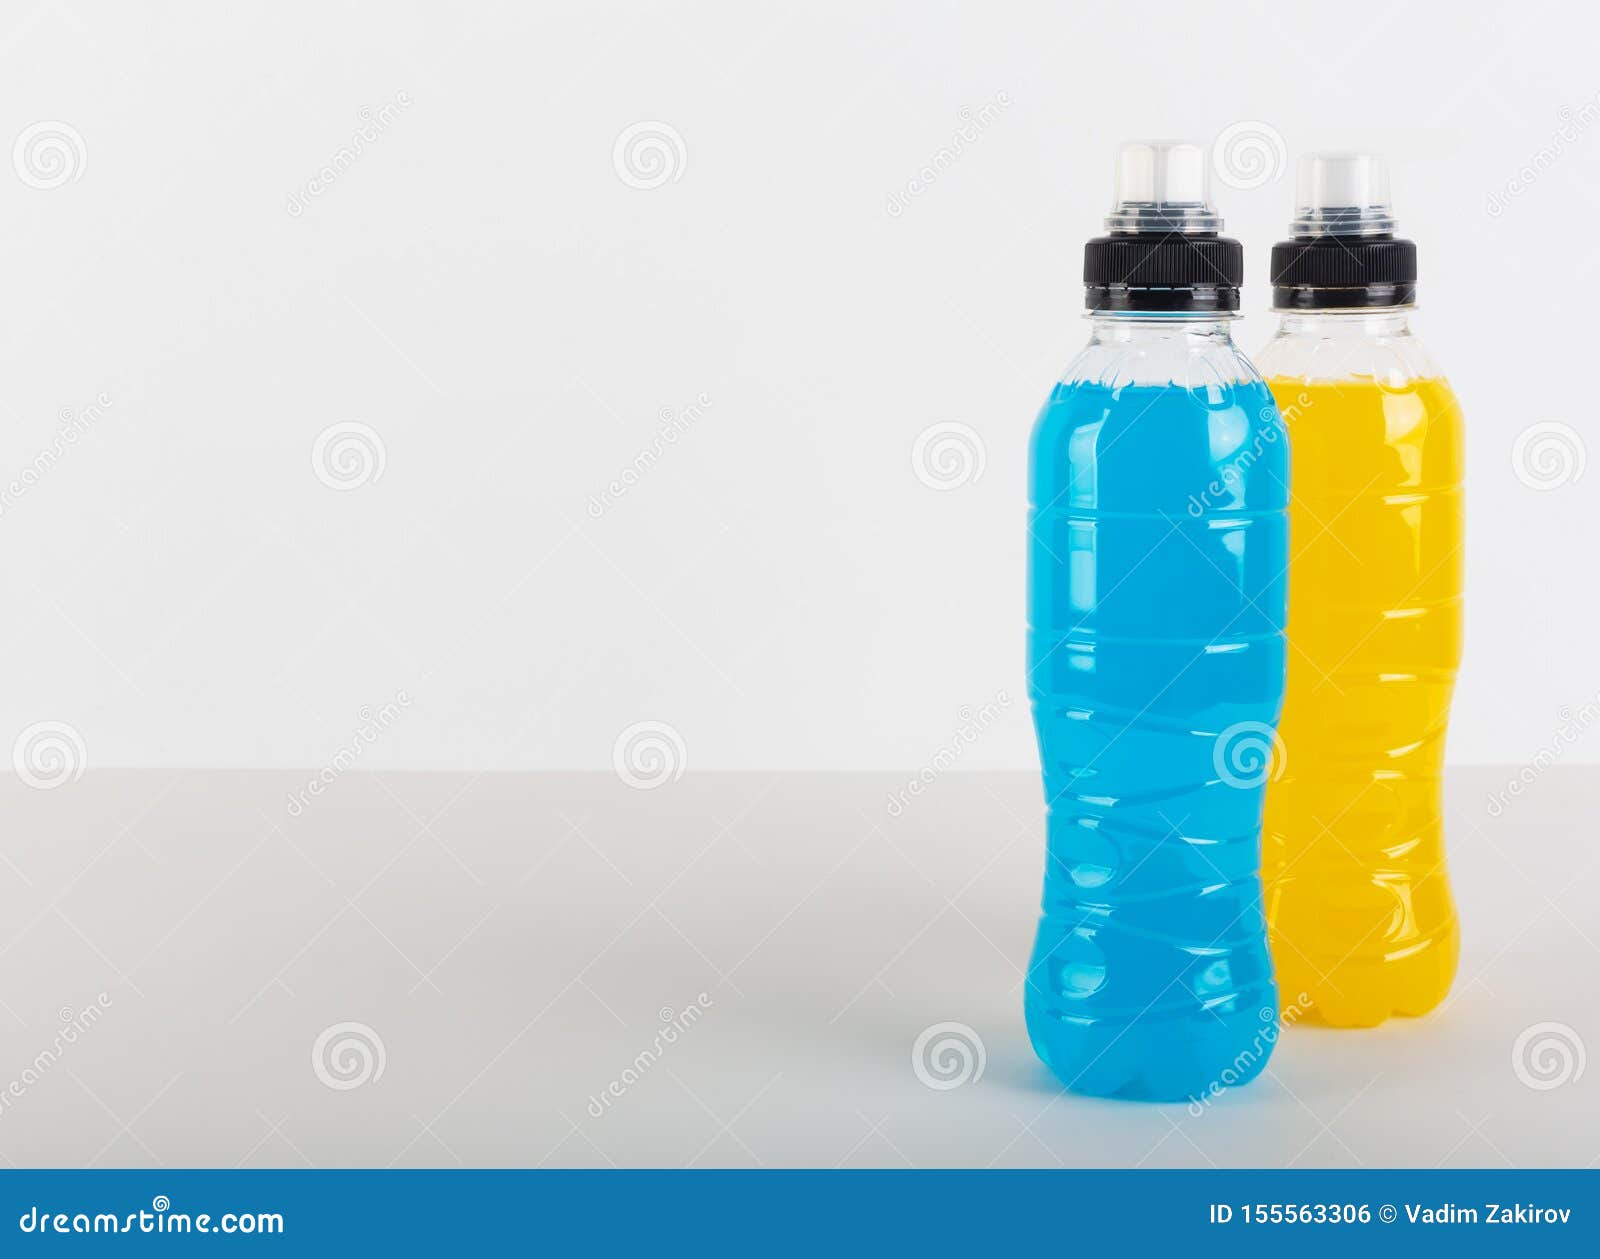 Isotonic Energy Drink Bottles With Blue And Yellow Transparent Liquid Sport Beverage On A White Background Stock Photo Image Of Healthy Energy